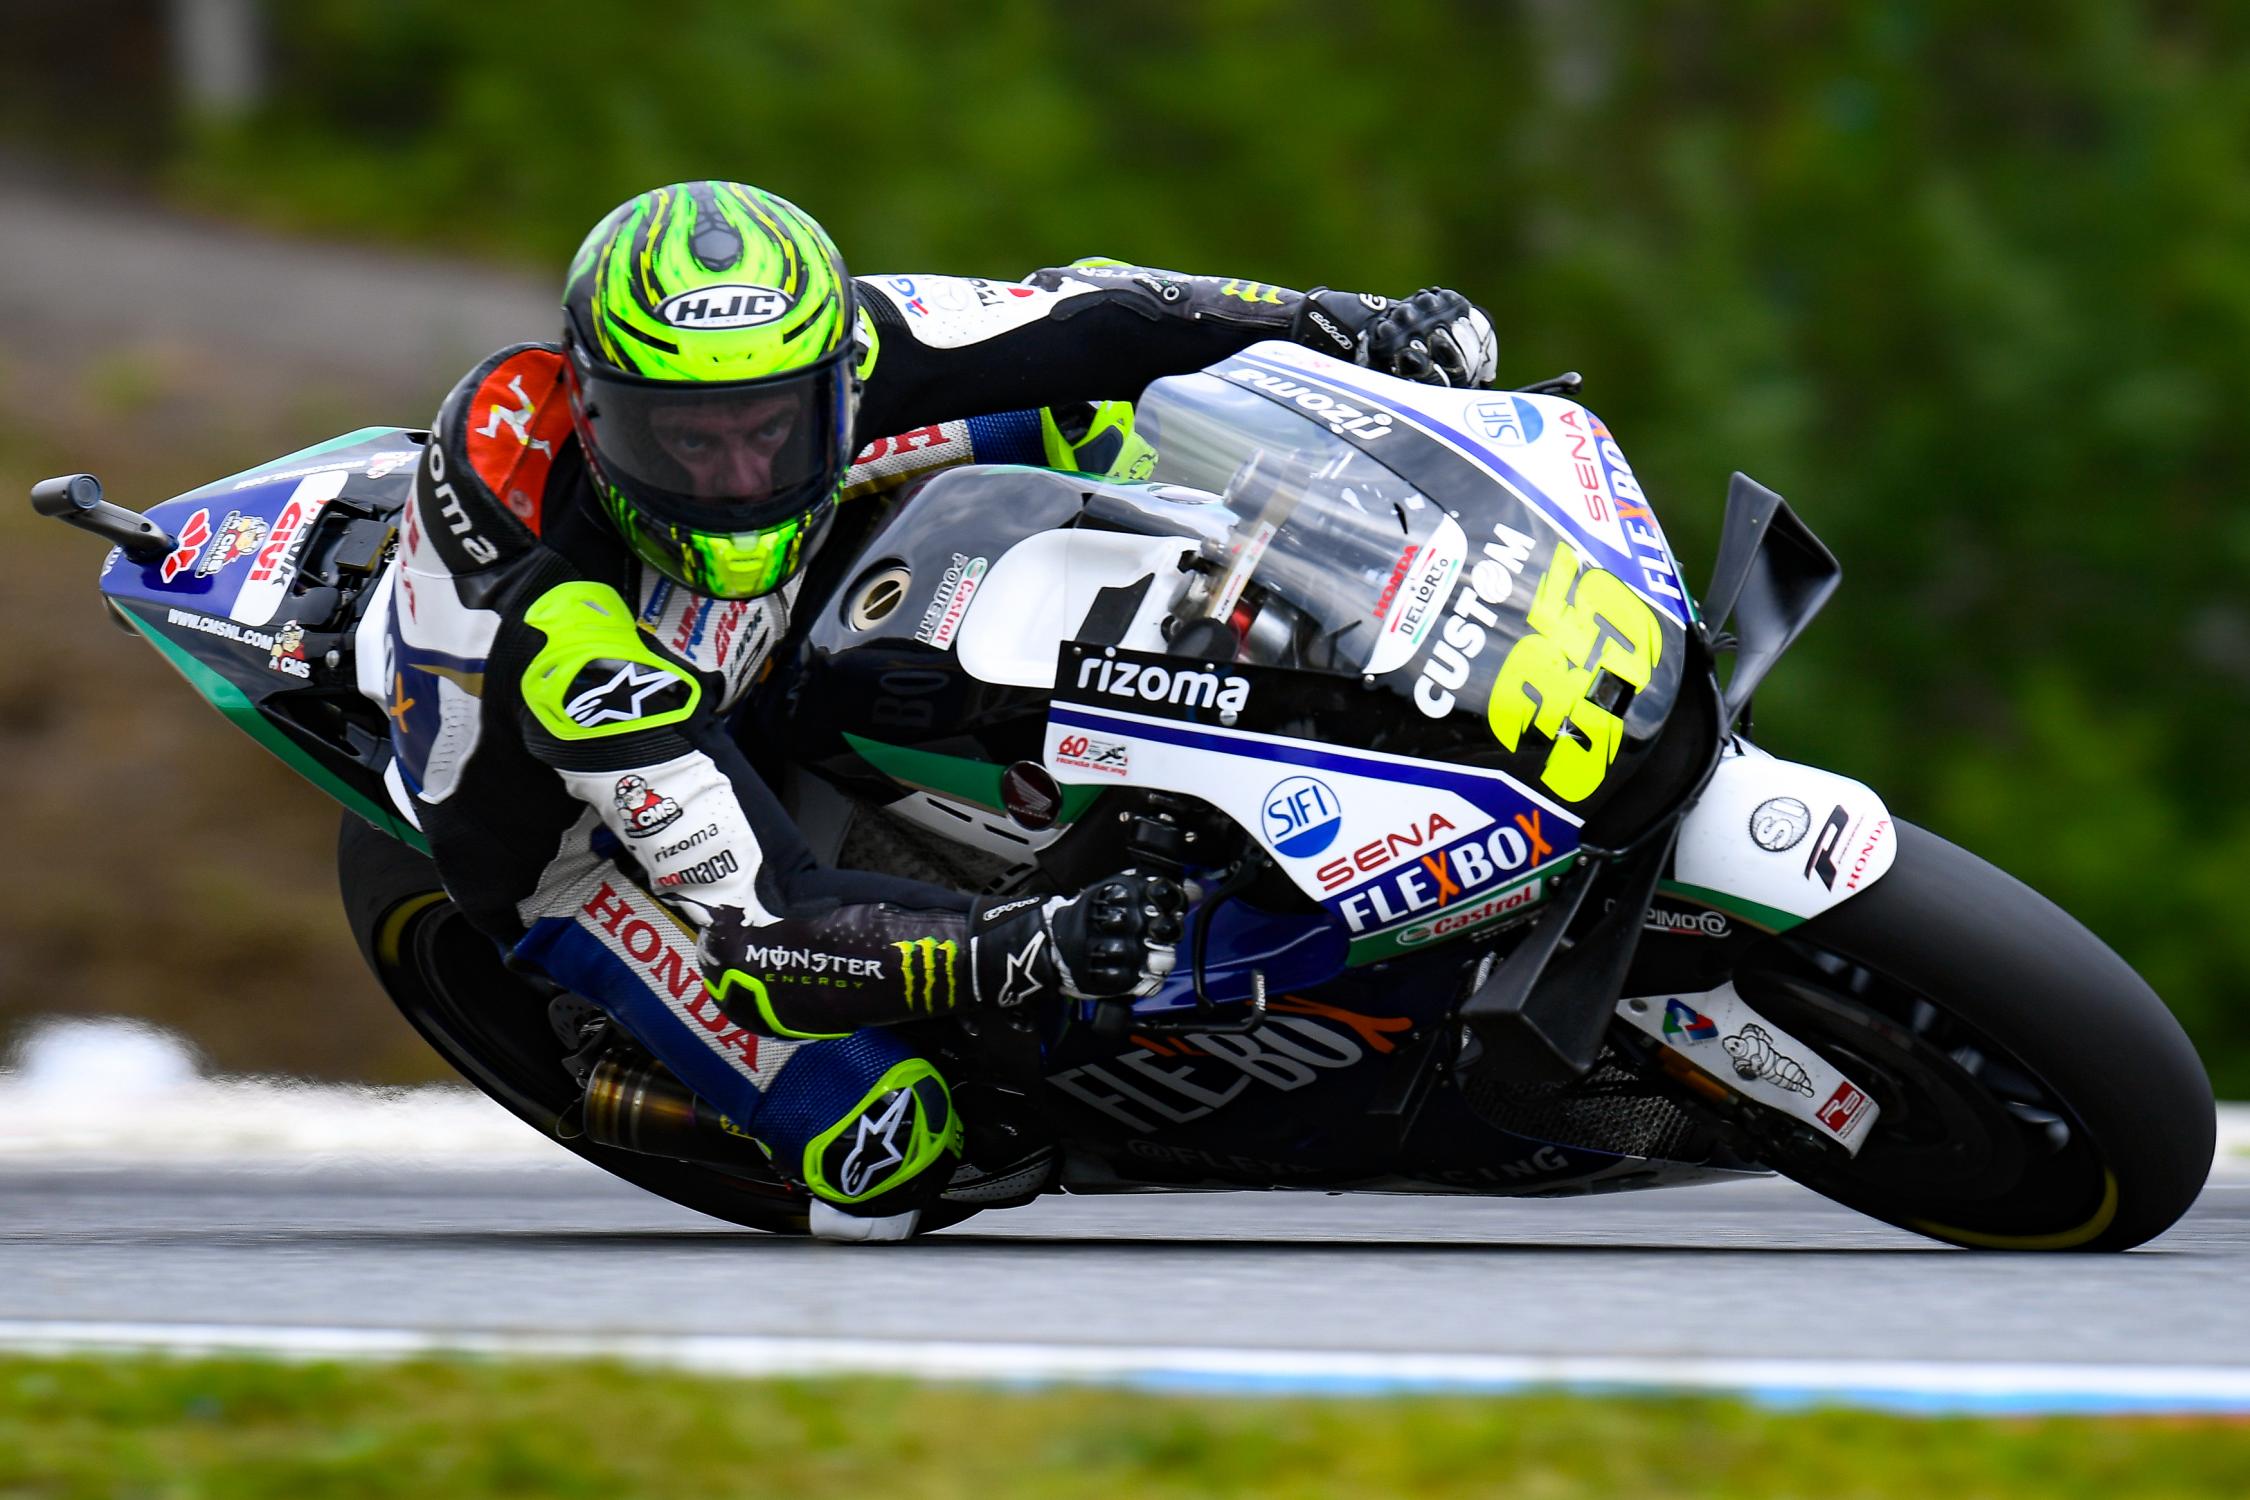 SOLID START FOR CRUTCHLOW AT BRNO